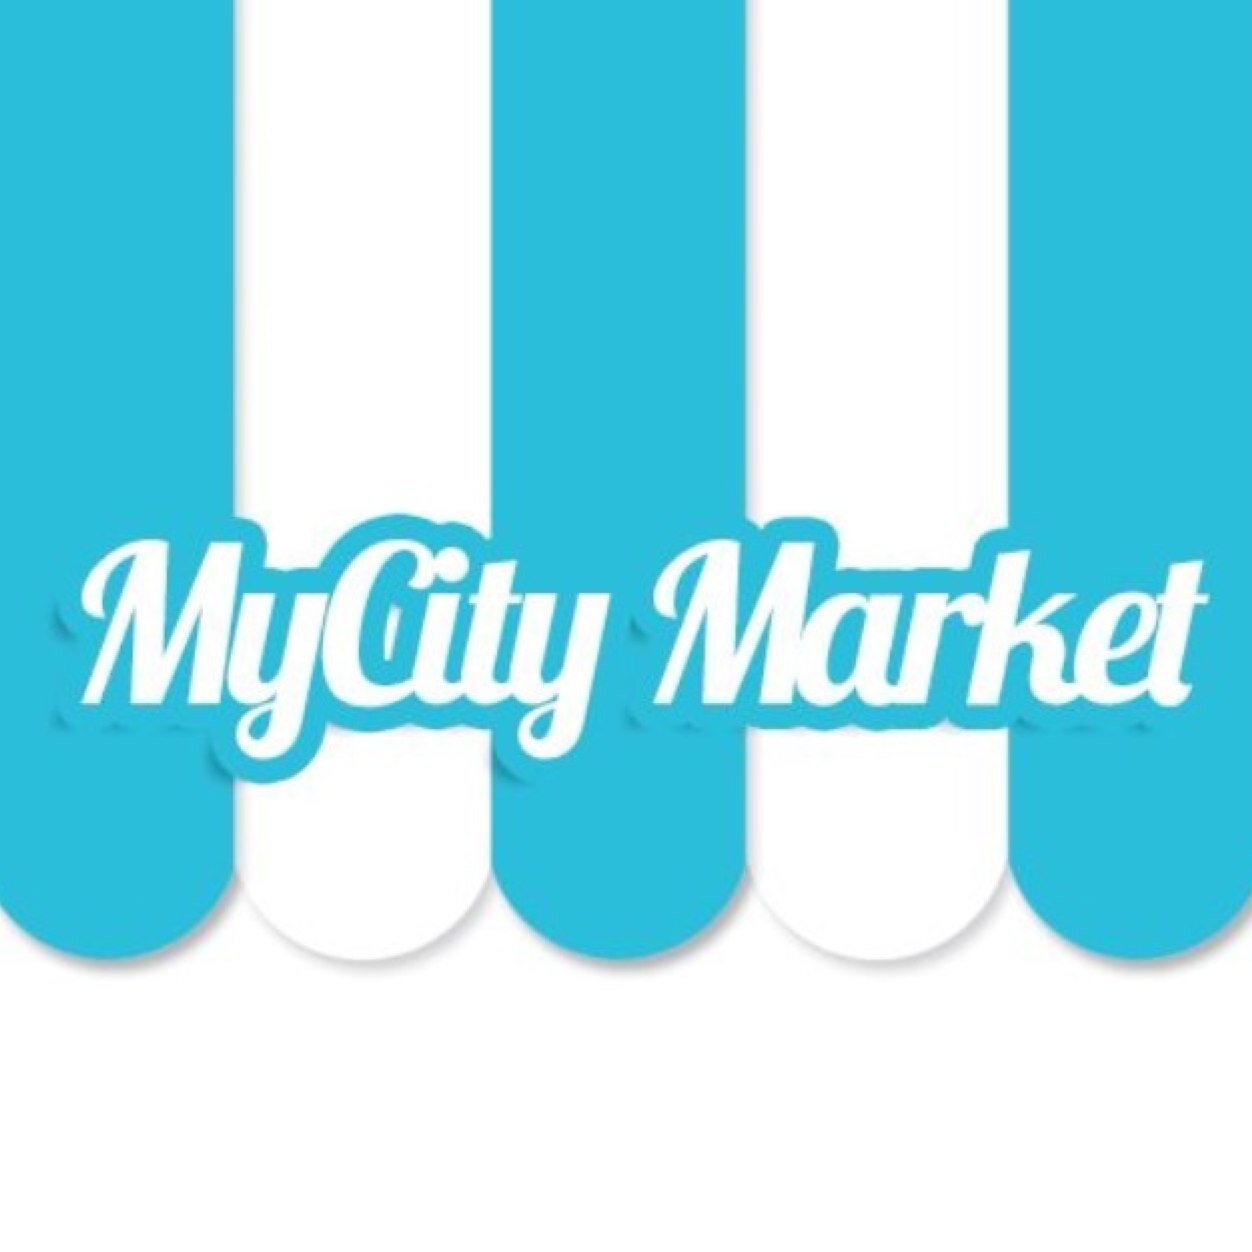 Glasgow's very own online marketplace. Shop locally, buy ethically and support your city. #mycitymarket